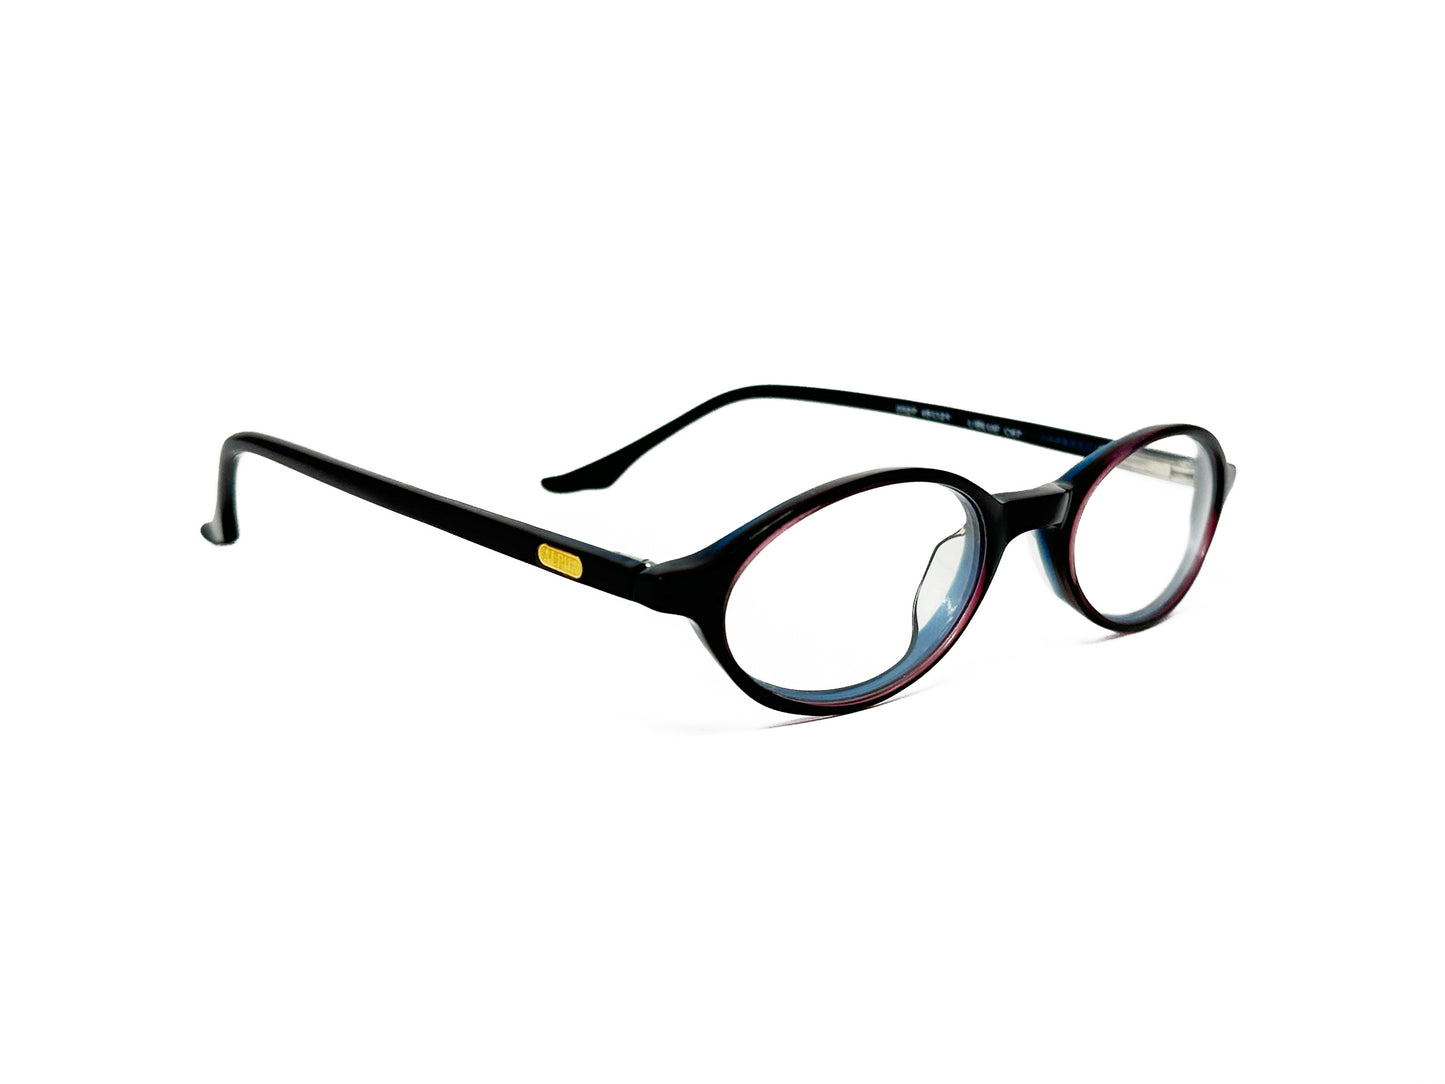 Alpha oval, acetate, optical frame. Model: 0327. Color: L/Blue C67 - Dark brown with blue accents. Side view.